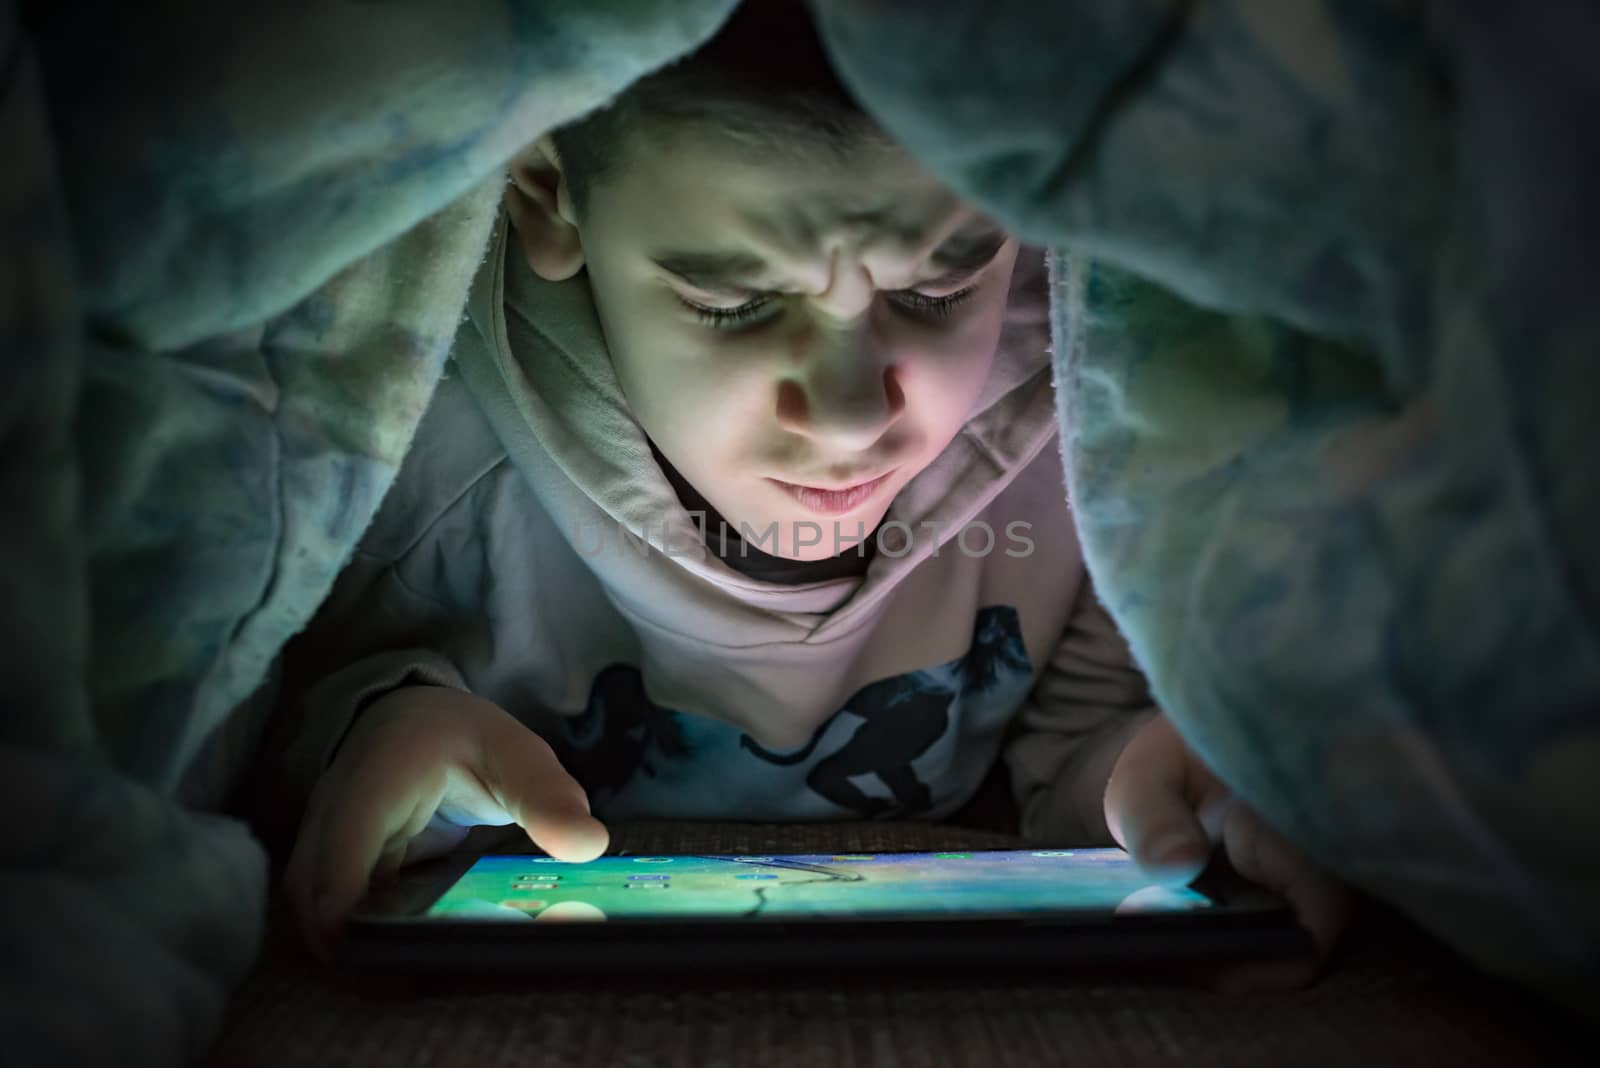 Child watching his tablet in the bed. Illuminated child face fro by deyan_georgiev